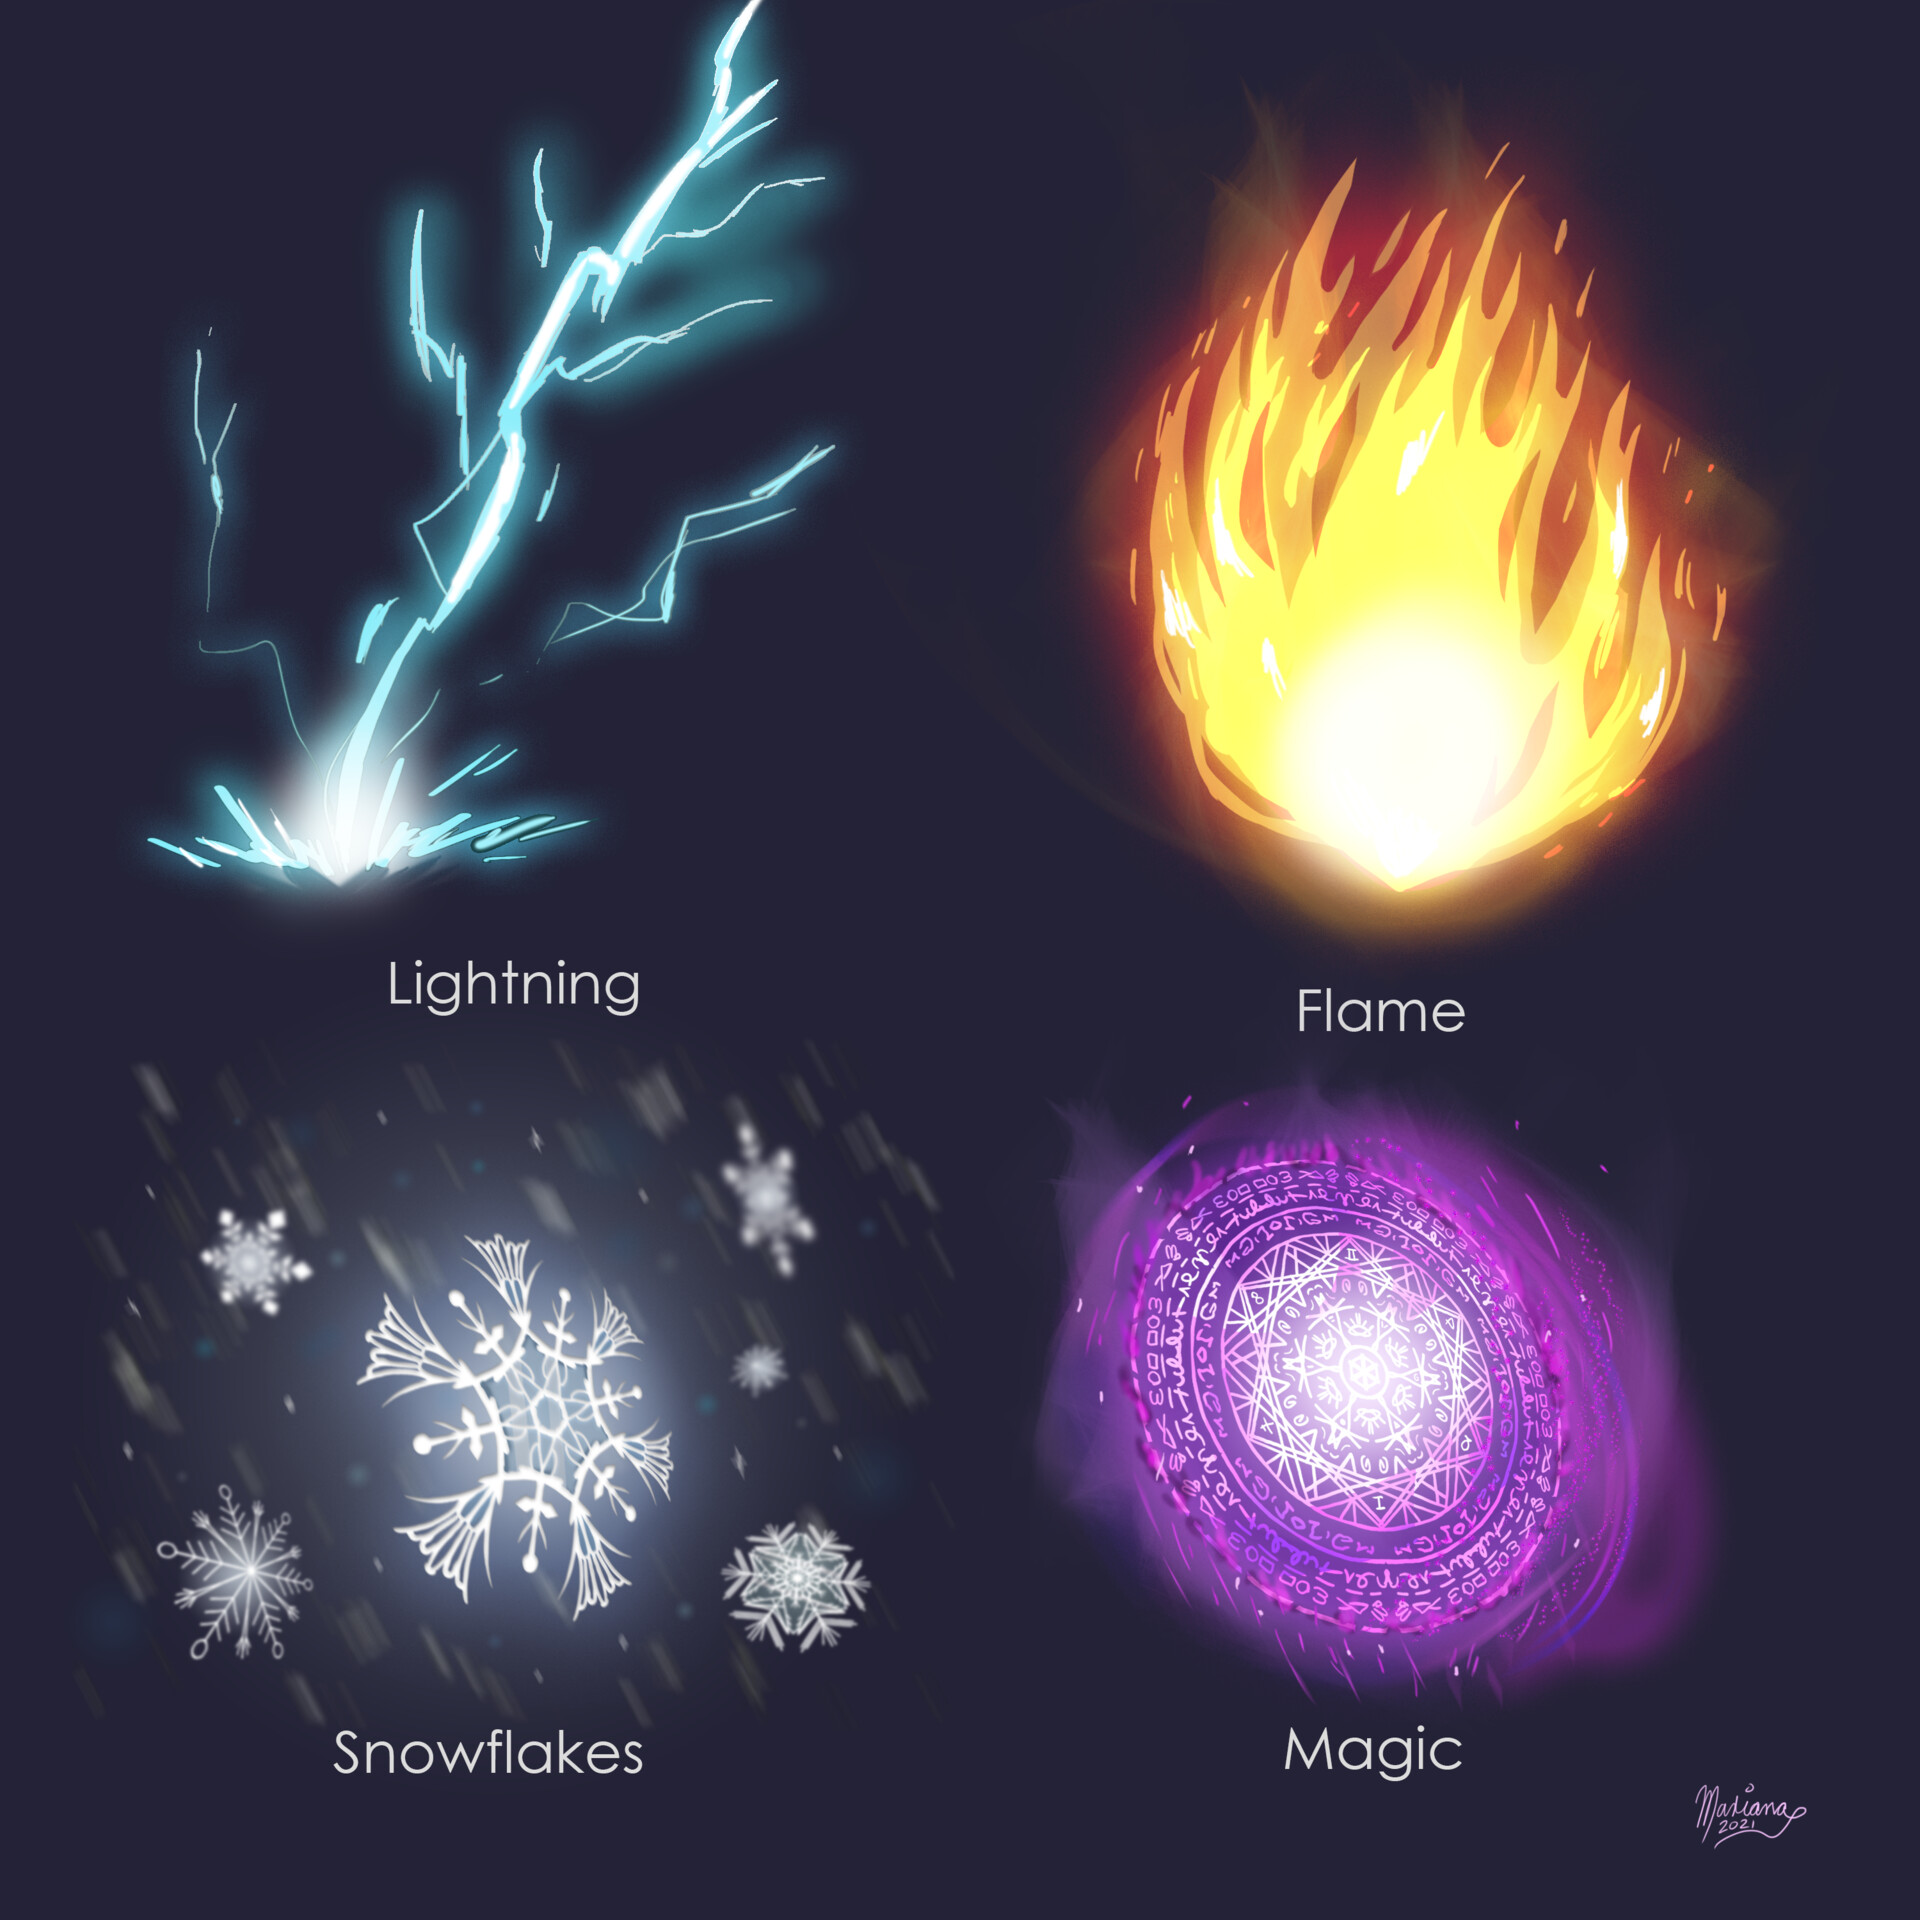 ArtStation - Magical and elemental effects